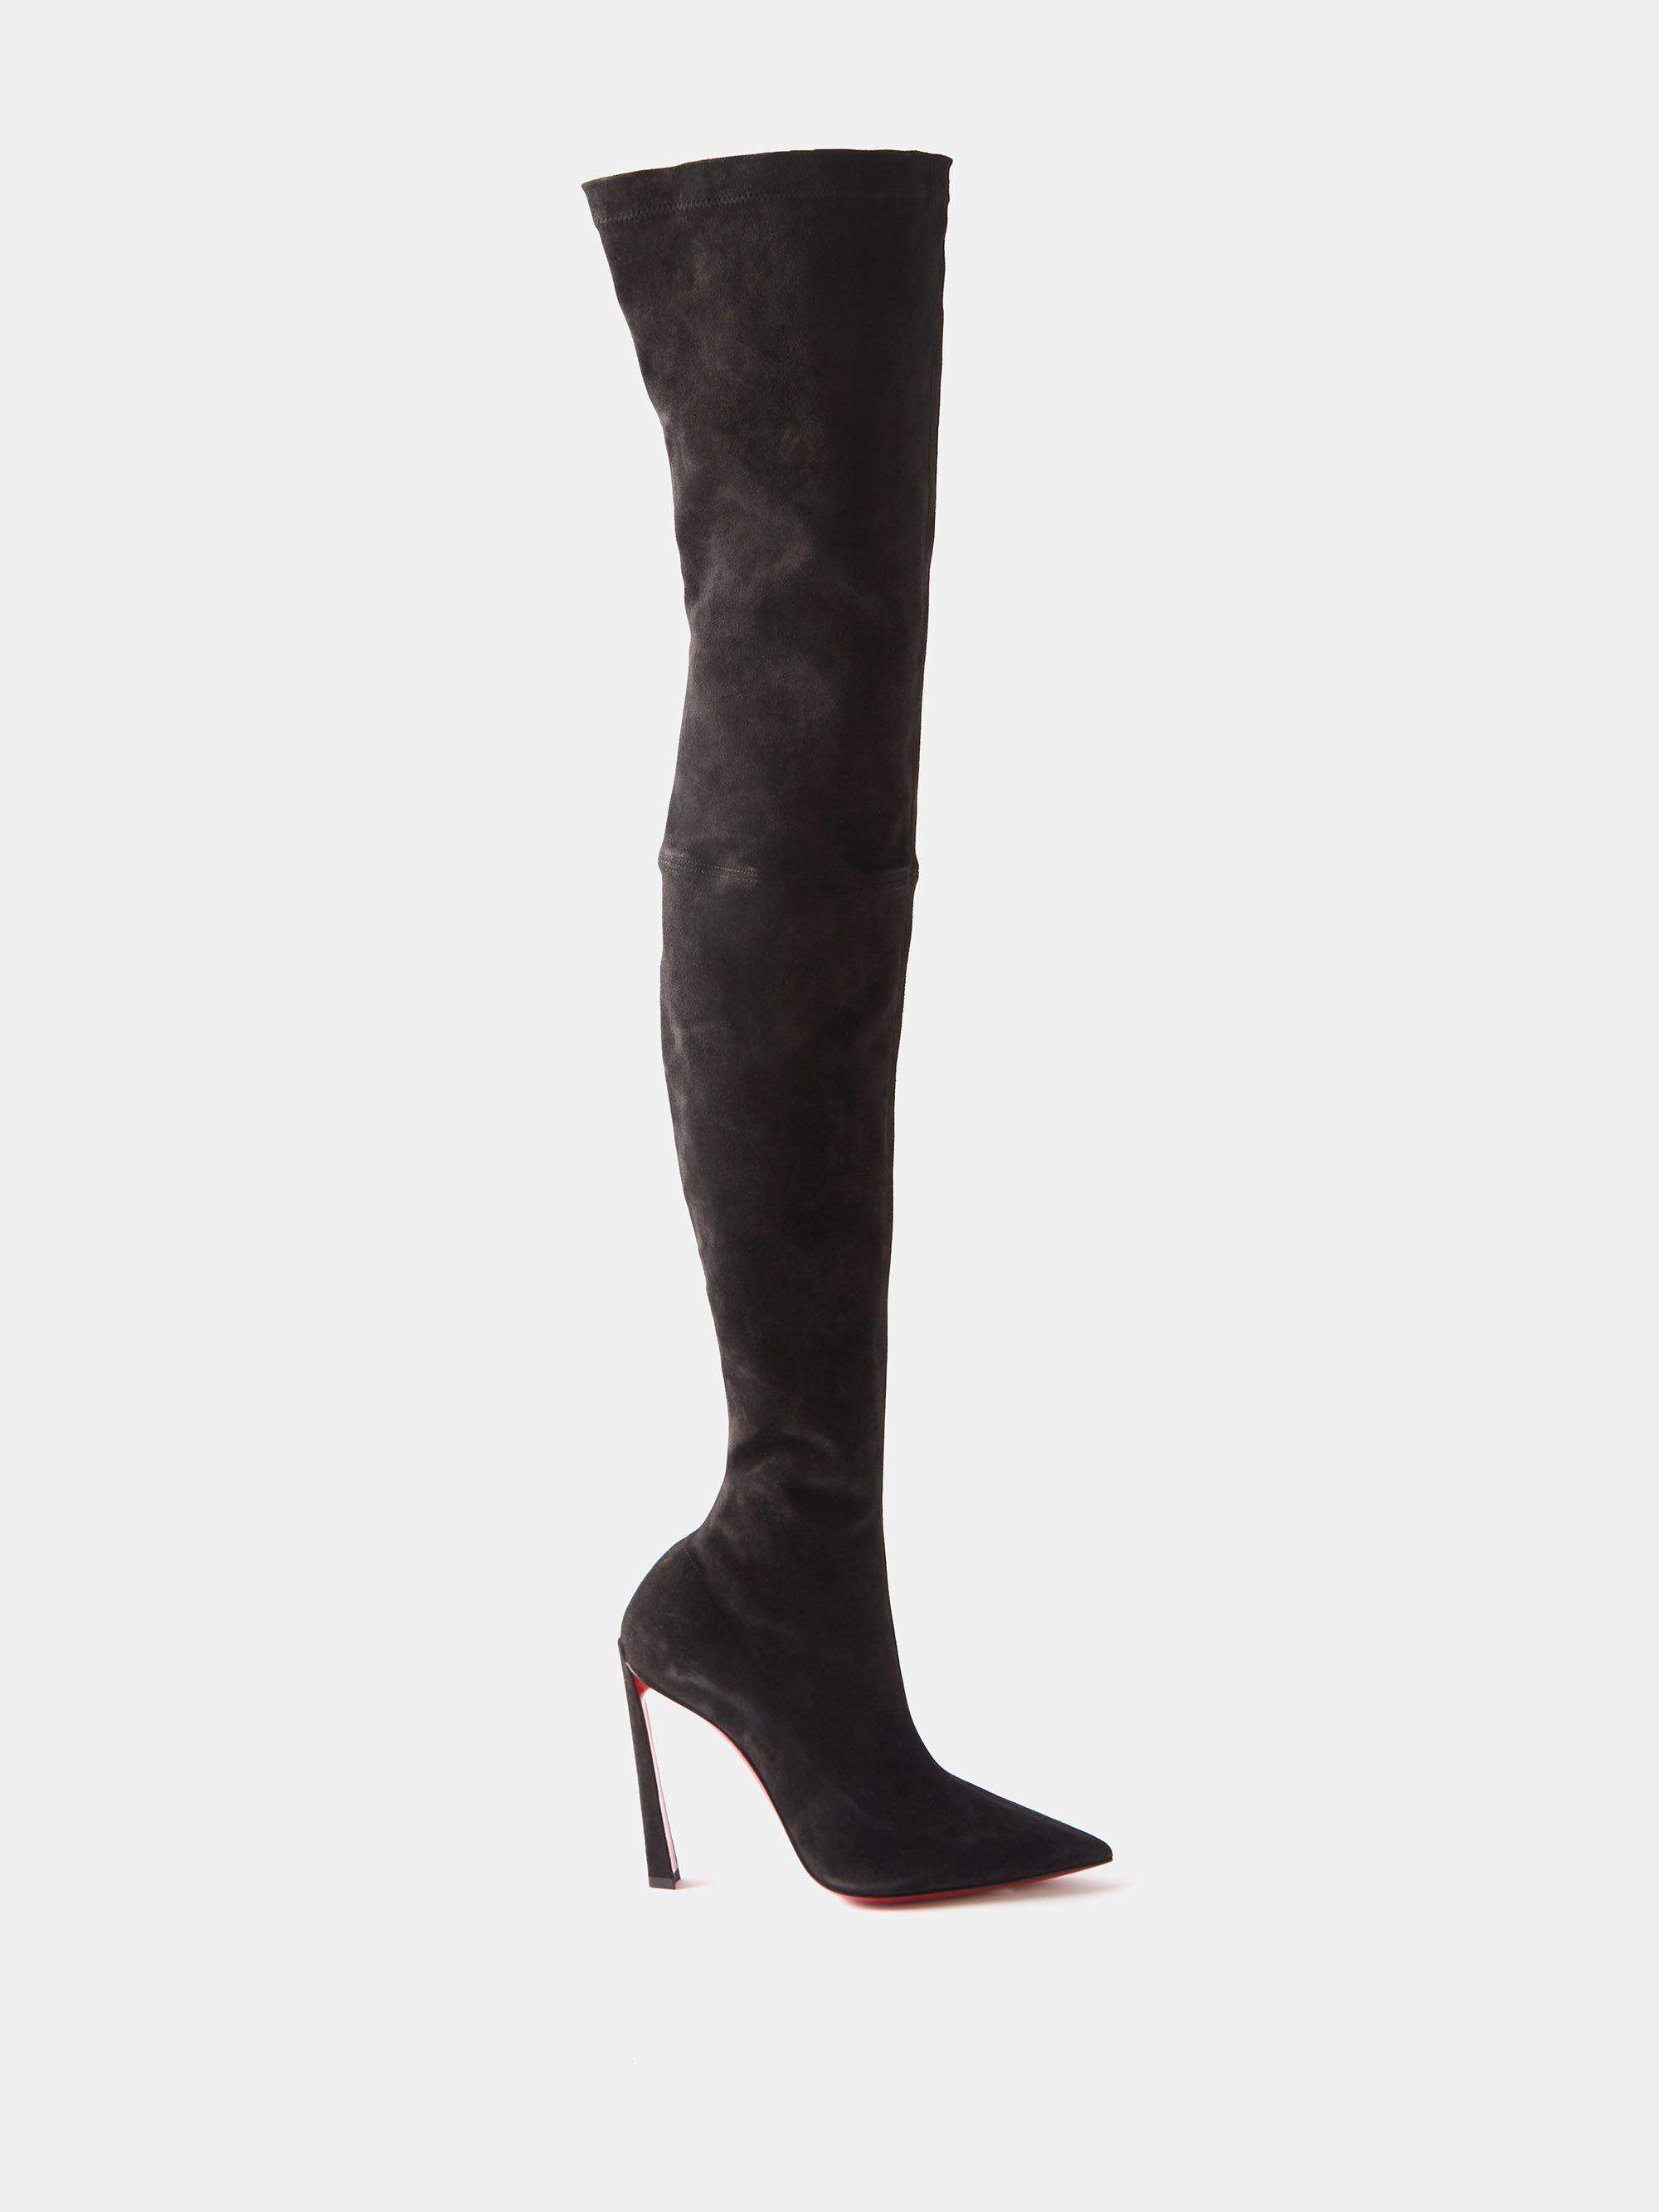 Christian Louboutin Condora Botta Alta 100 Over-the-knee Suede Boots in ...